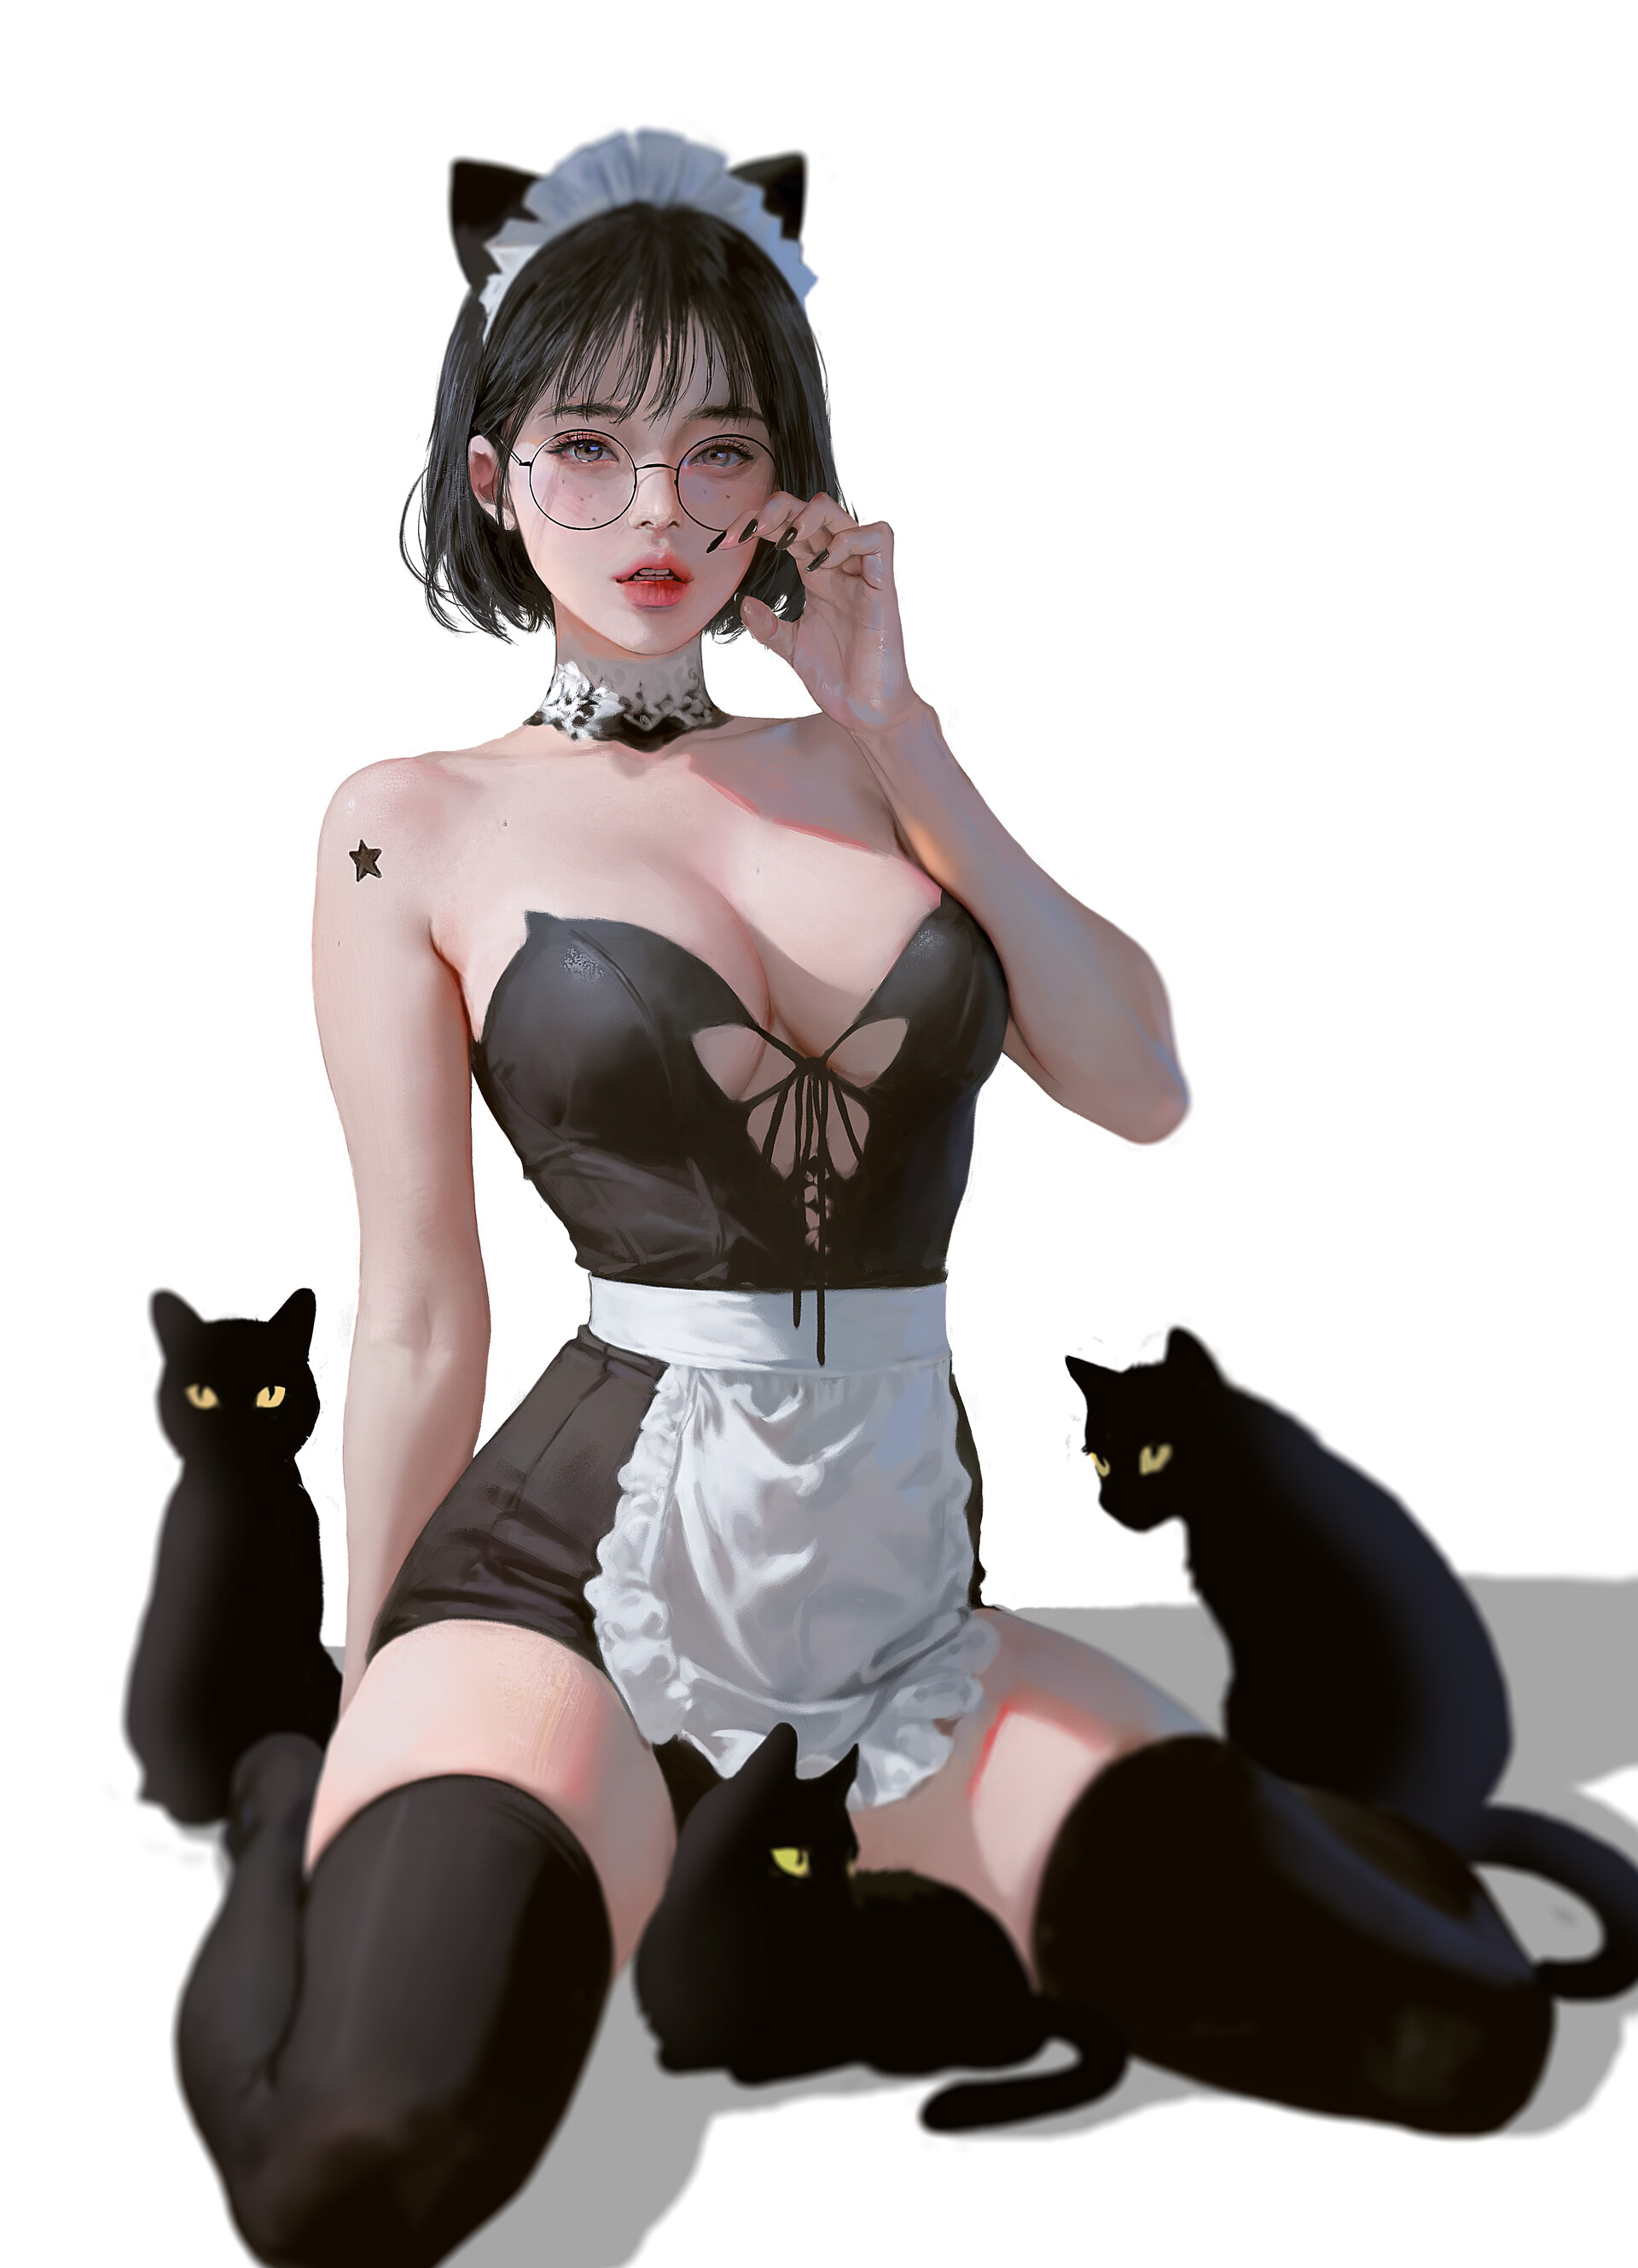 General 1920x2658 J. Won Han digital art artwork illustration women animals cats portrait display stockings cat ears women with glasses glasses short hair white background simple background minimalism big boobs maid maid outfit kneeling looking at viewer